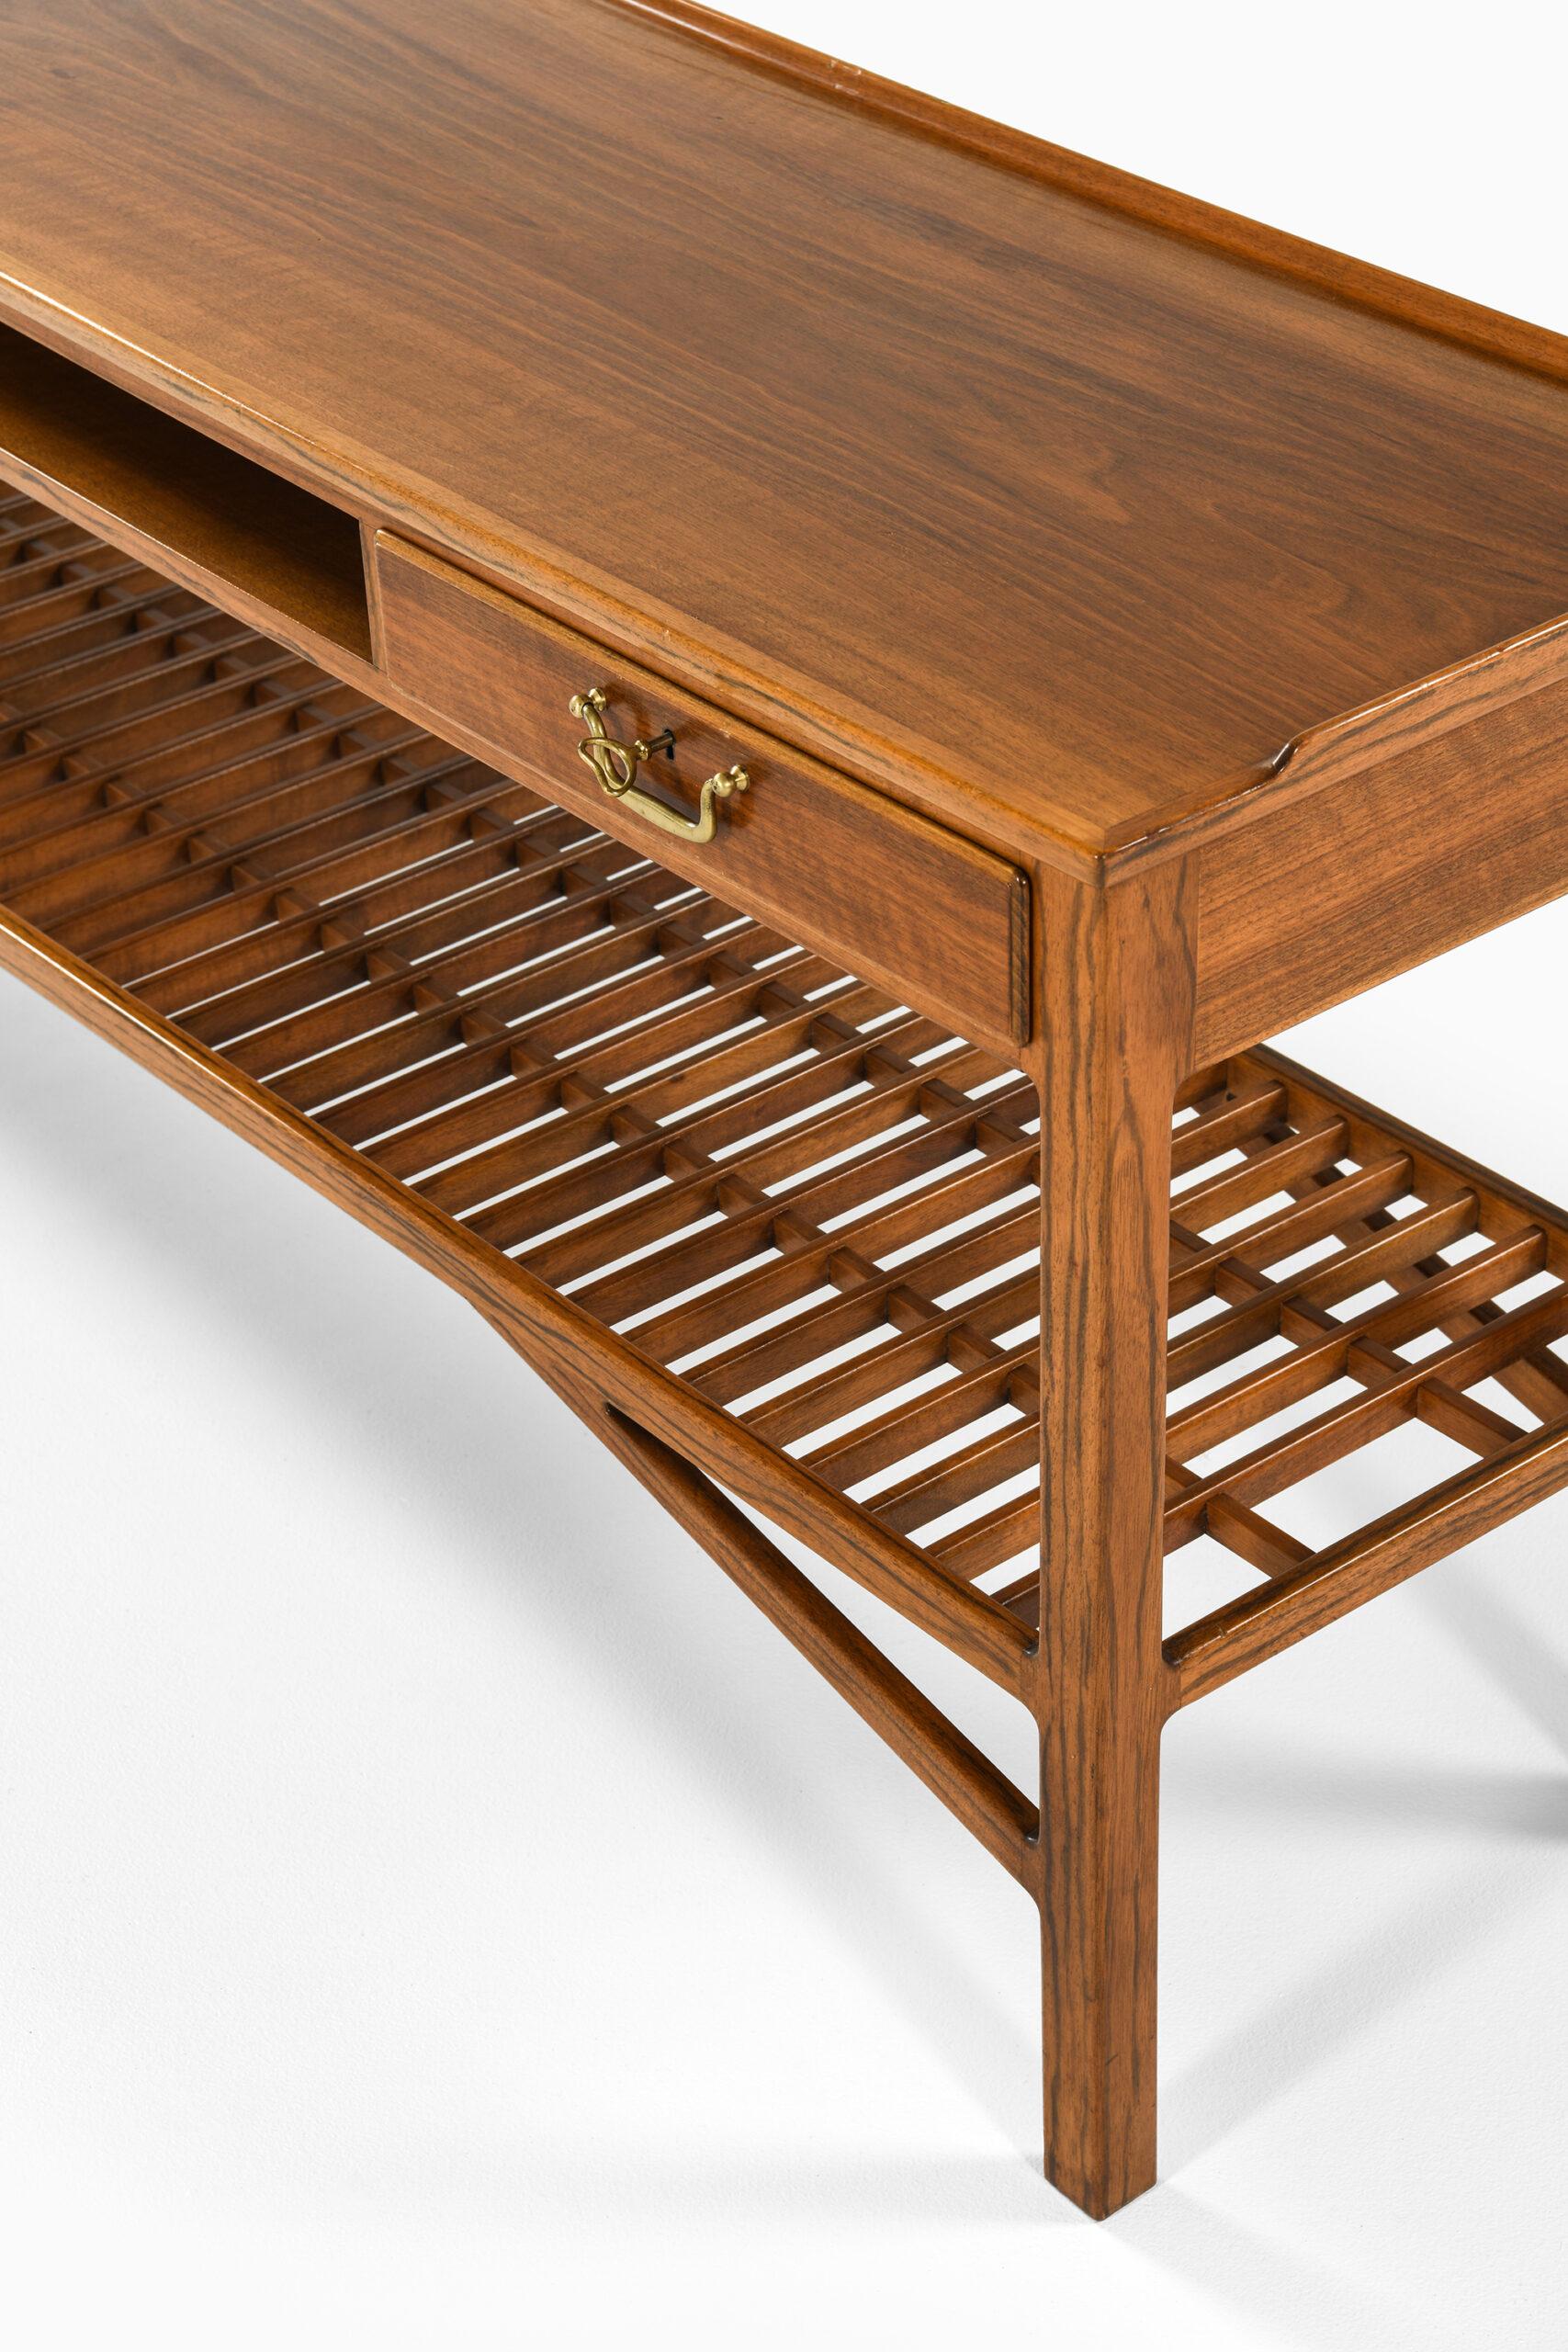 Sideboard / Side Table Attributed to Carl-Axel Acking Produced by NK For Sale 1